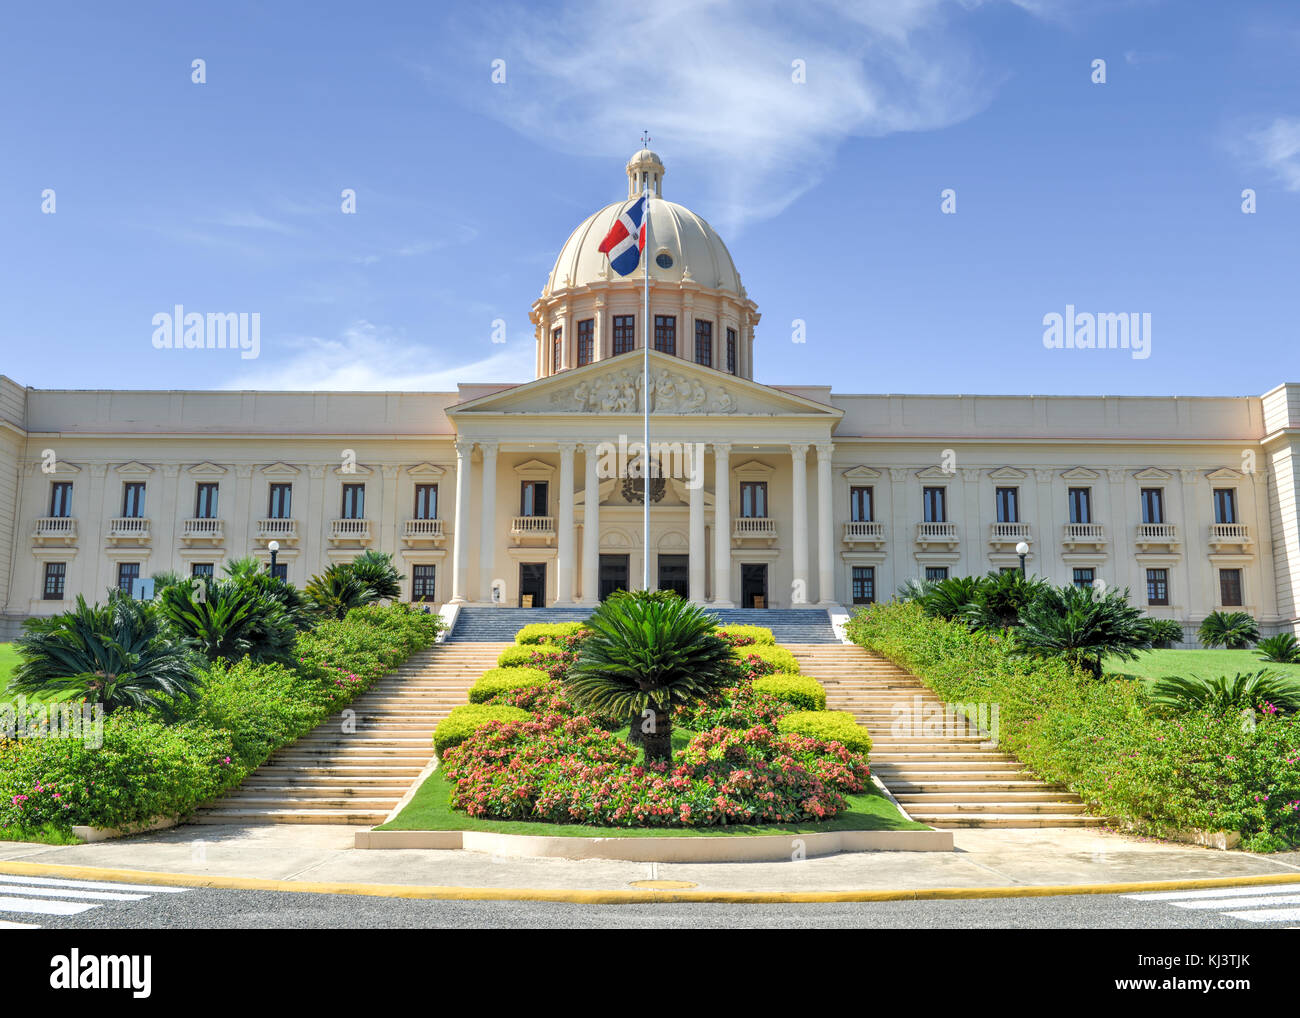 The National Palace in Santo Domingo houses the offices of the Executive Branch (Presidency and Vice-Presidency) of the Dominican Republic. Stock Photo